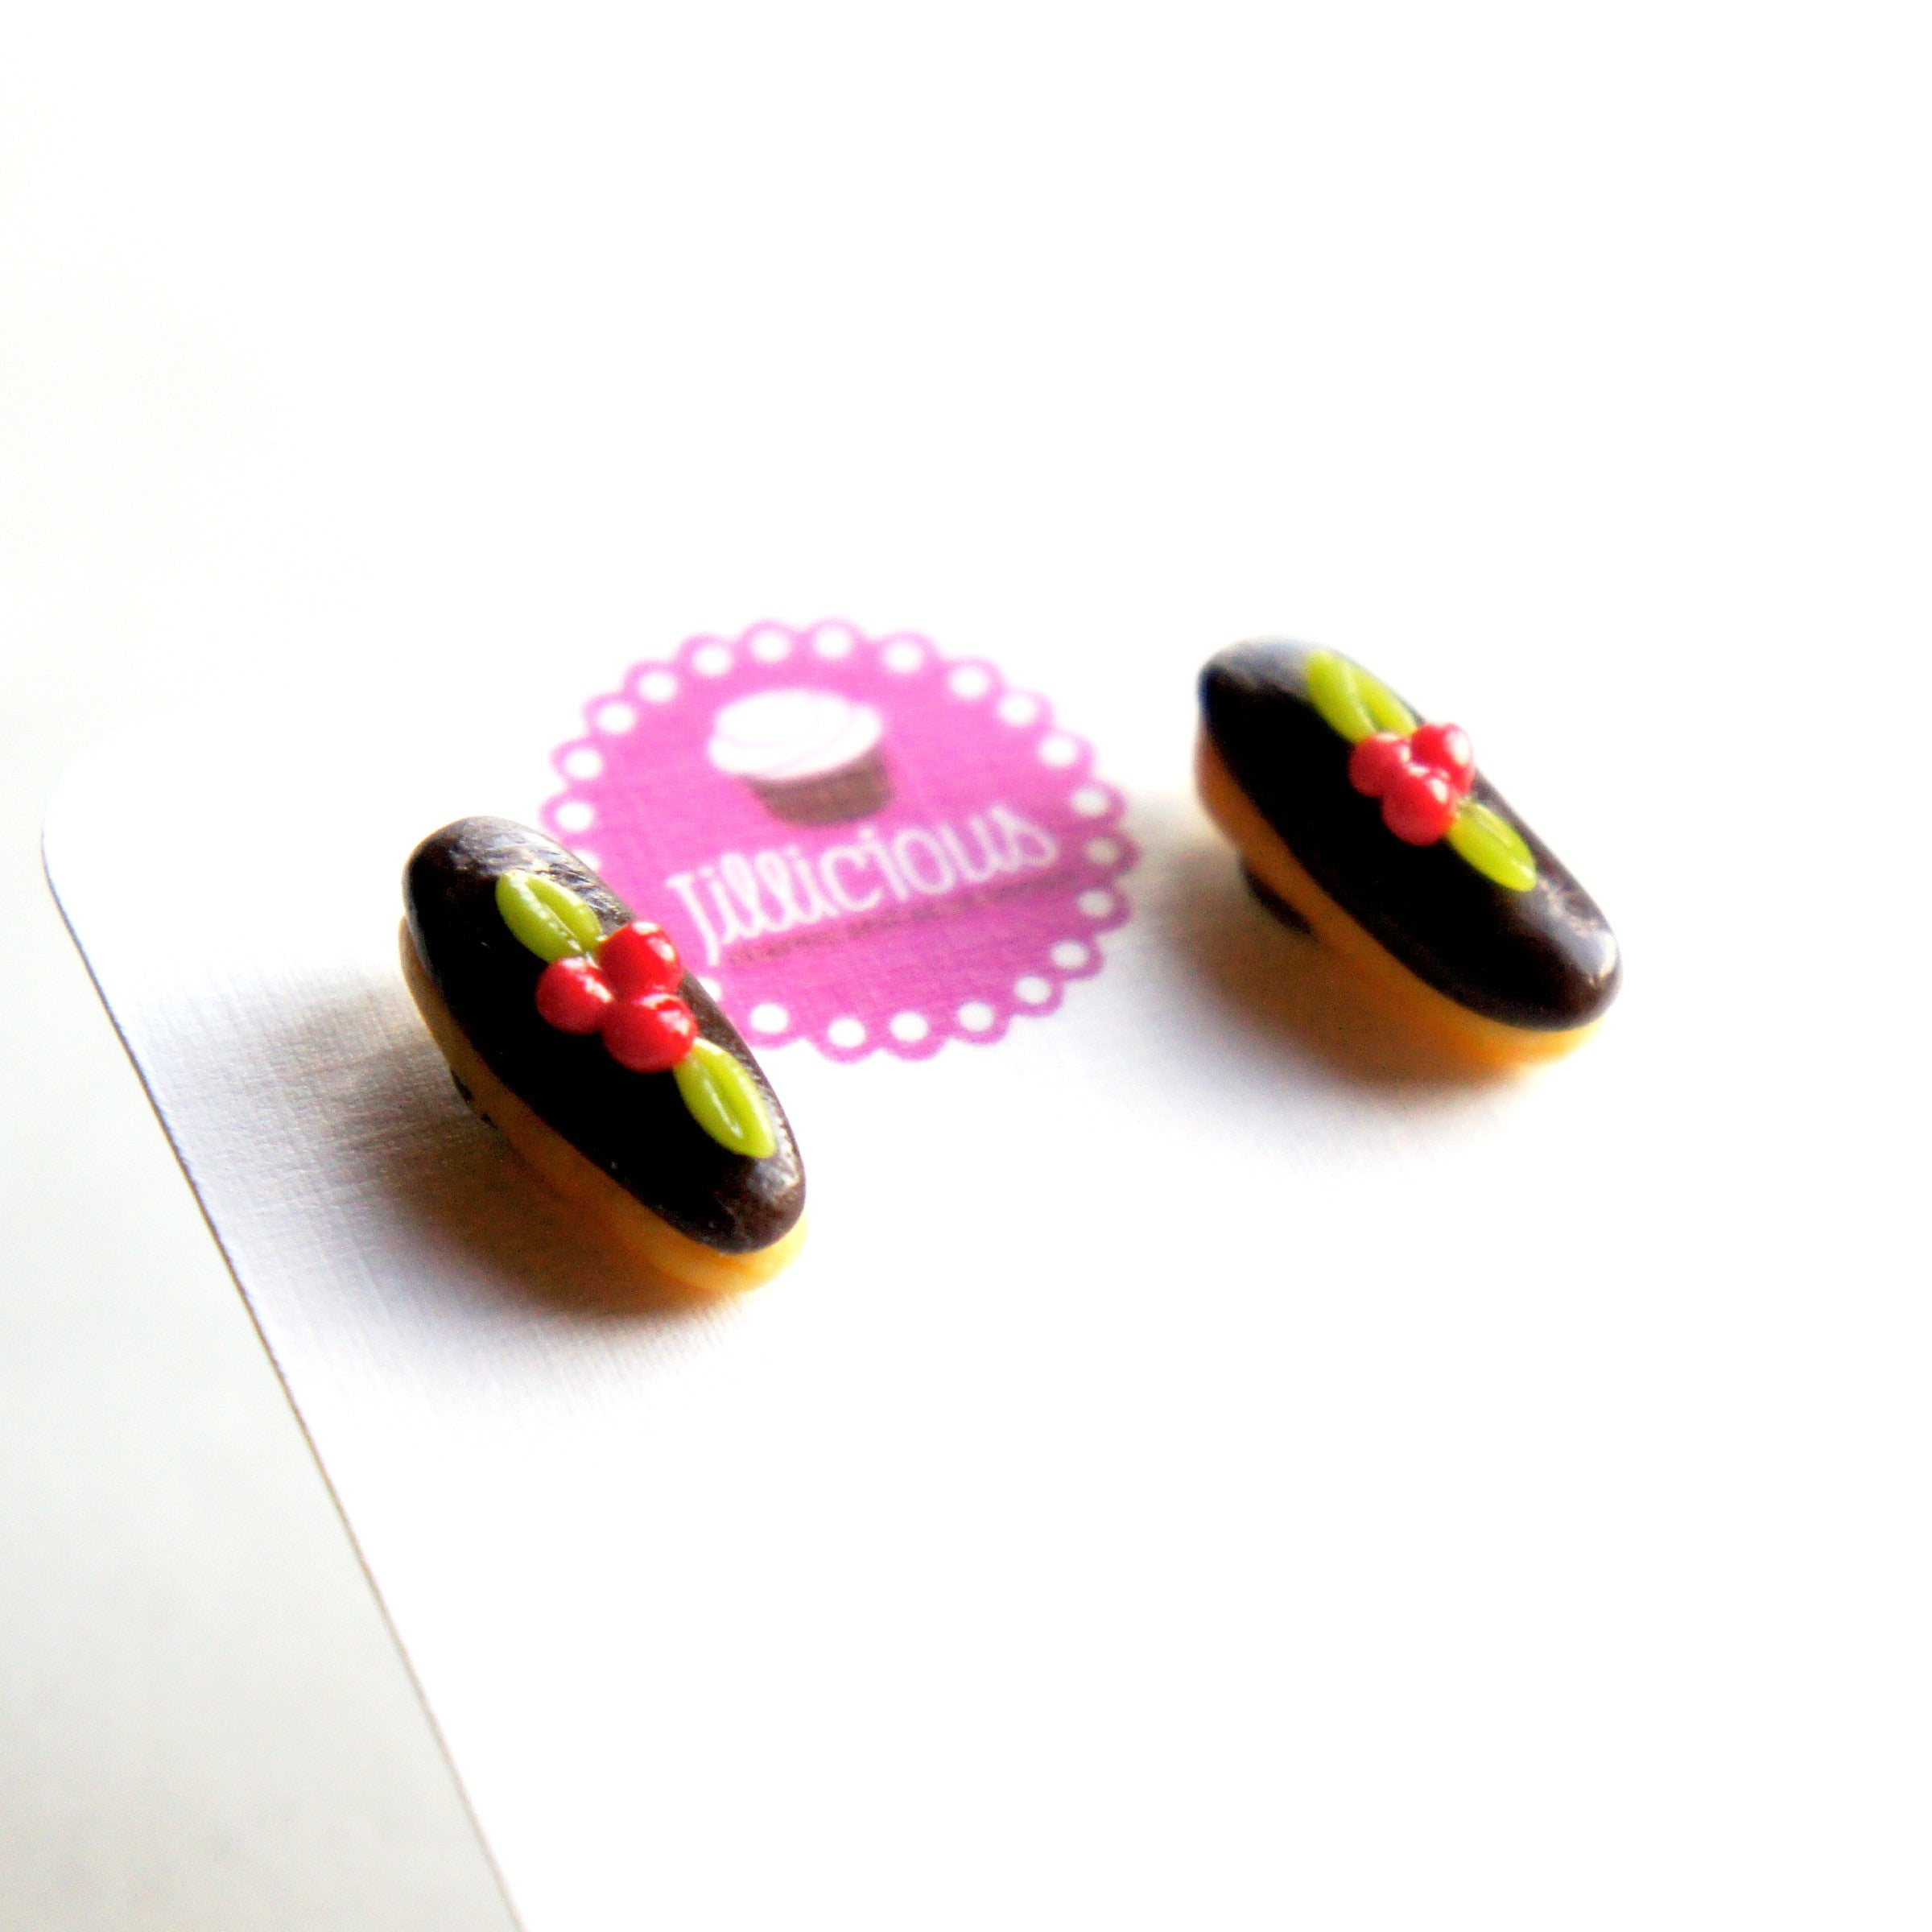 Holiday Chocolate Eclair Earrings - Jillicious charms and accessories